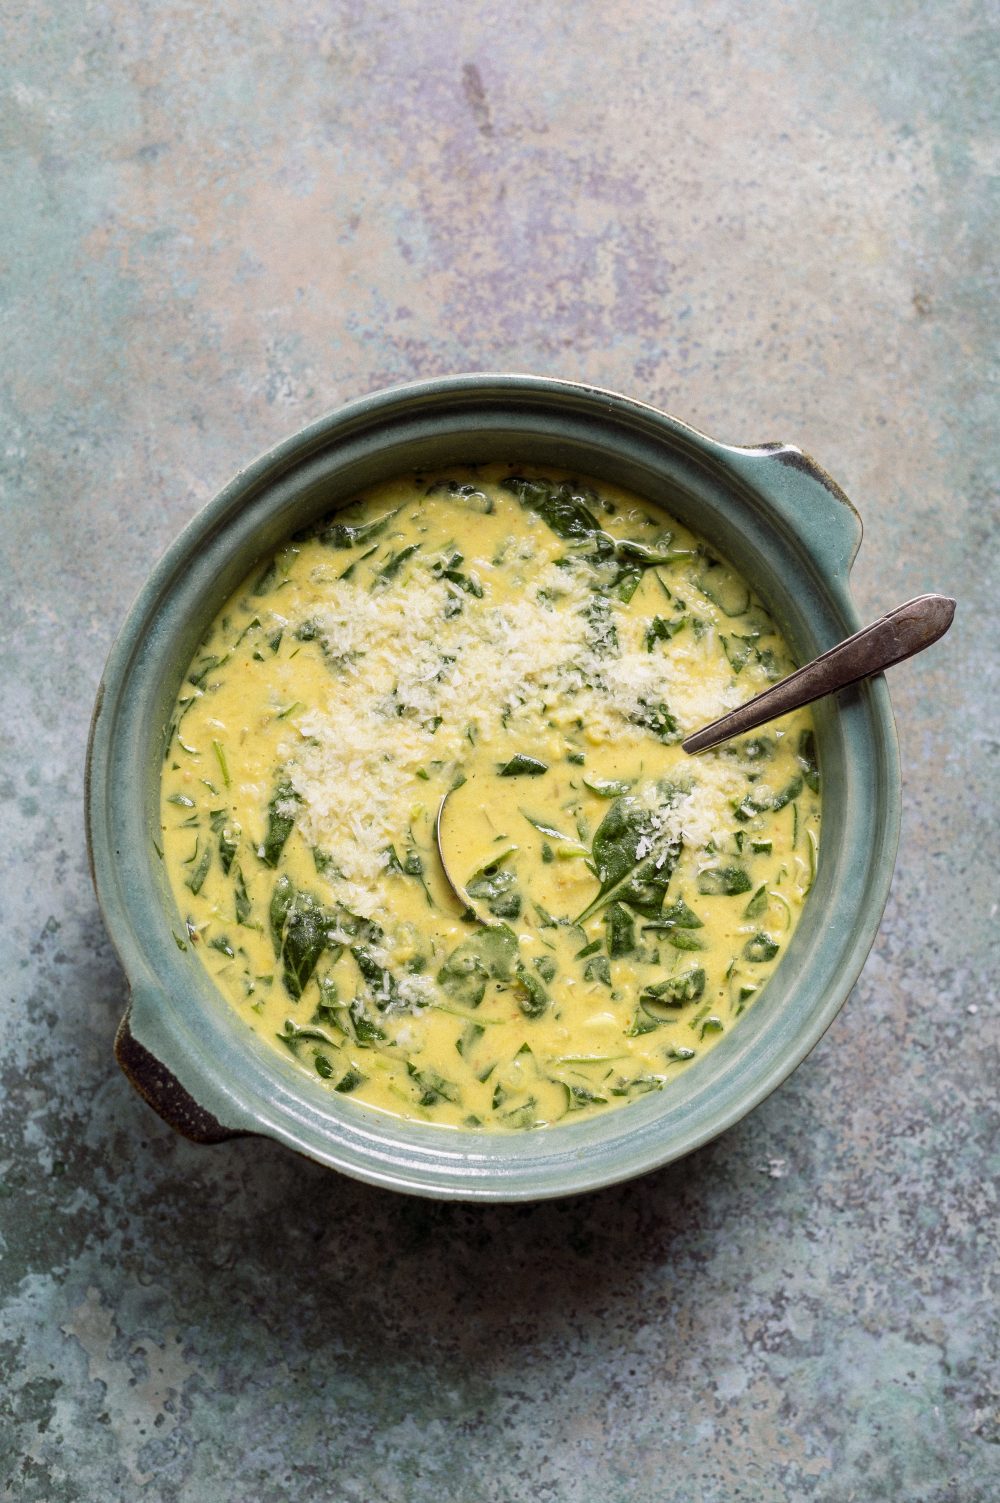 Red Lentil Soup with Coconut Milk and Spinach (Durotherm)